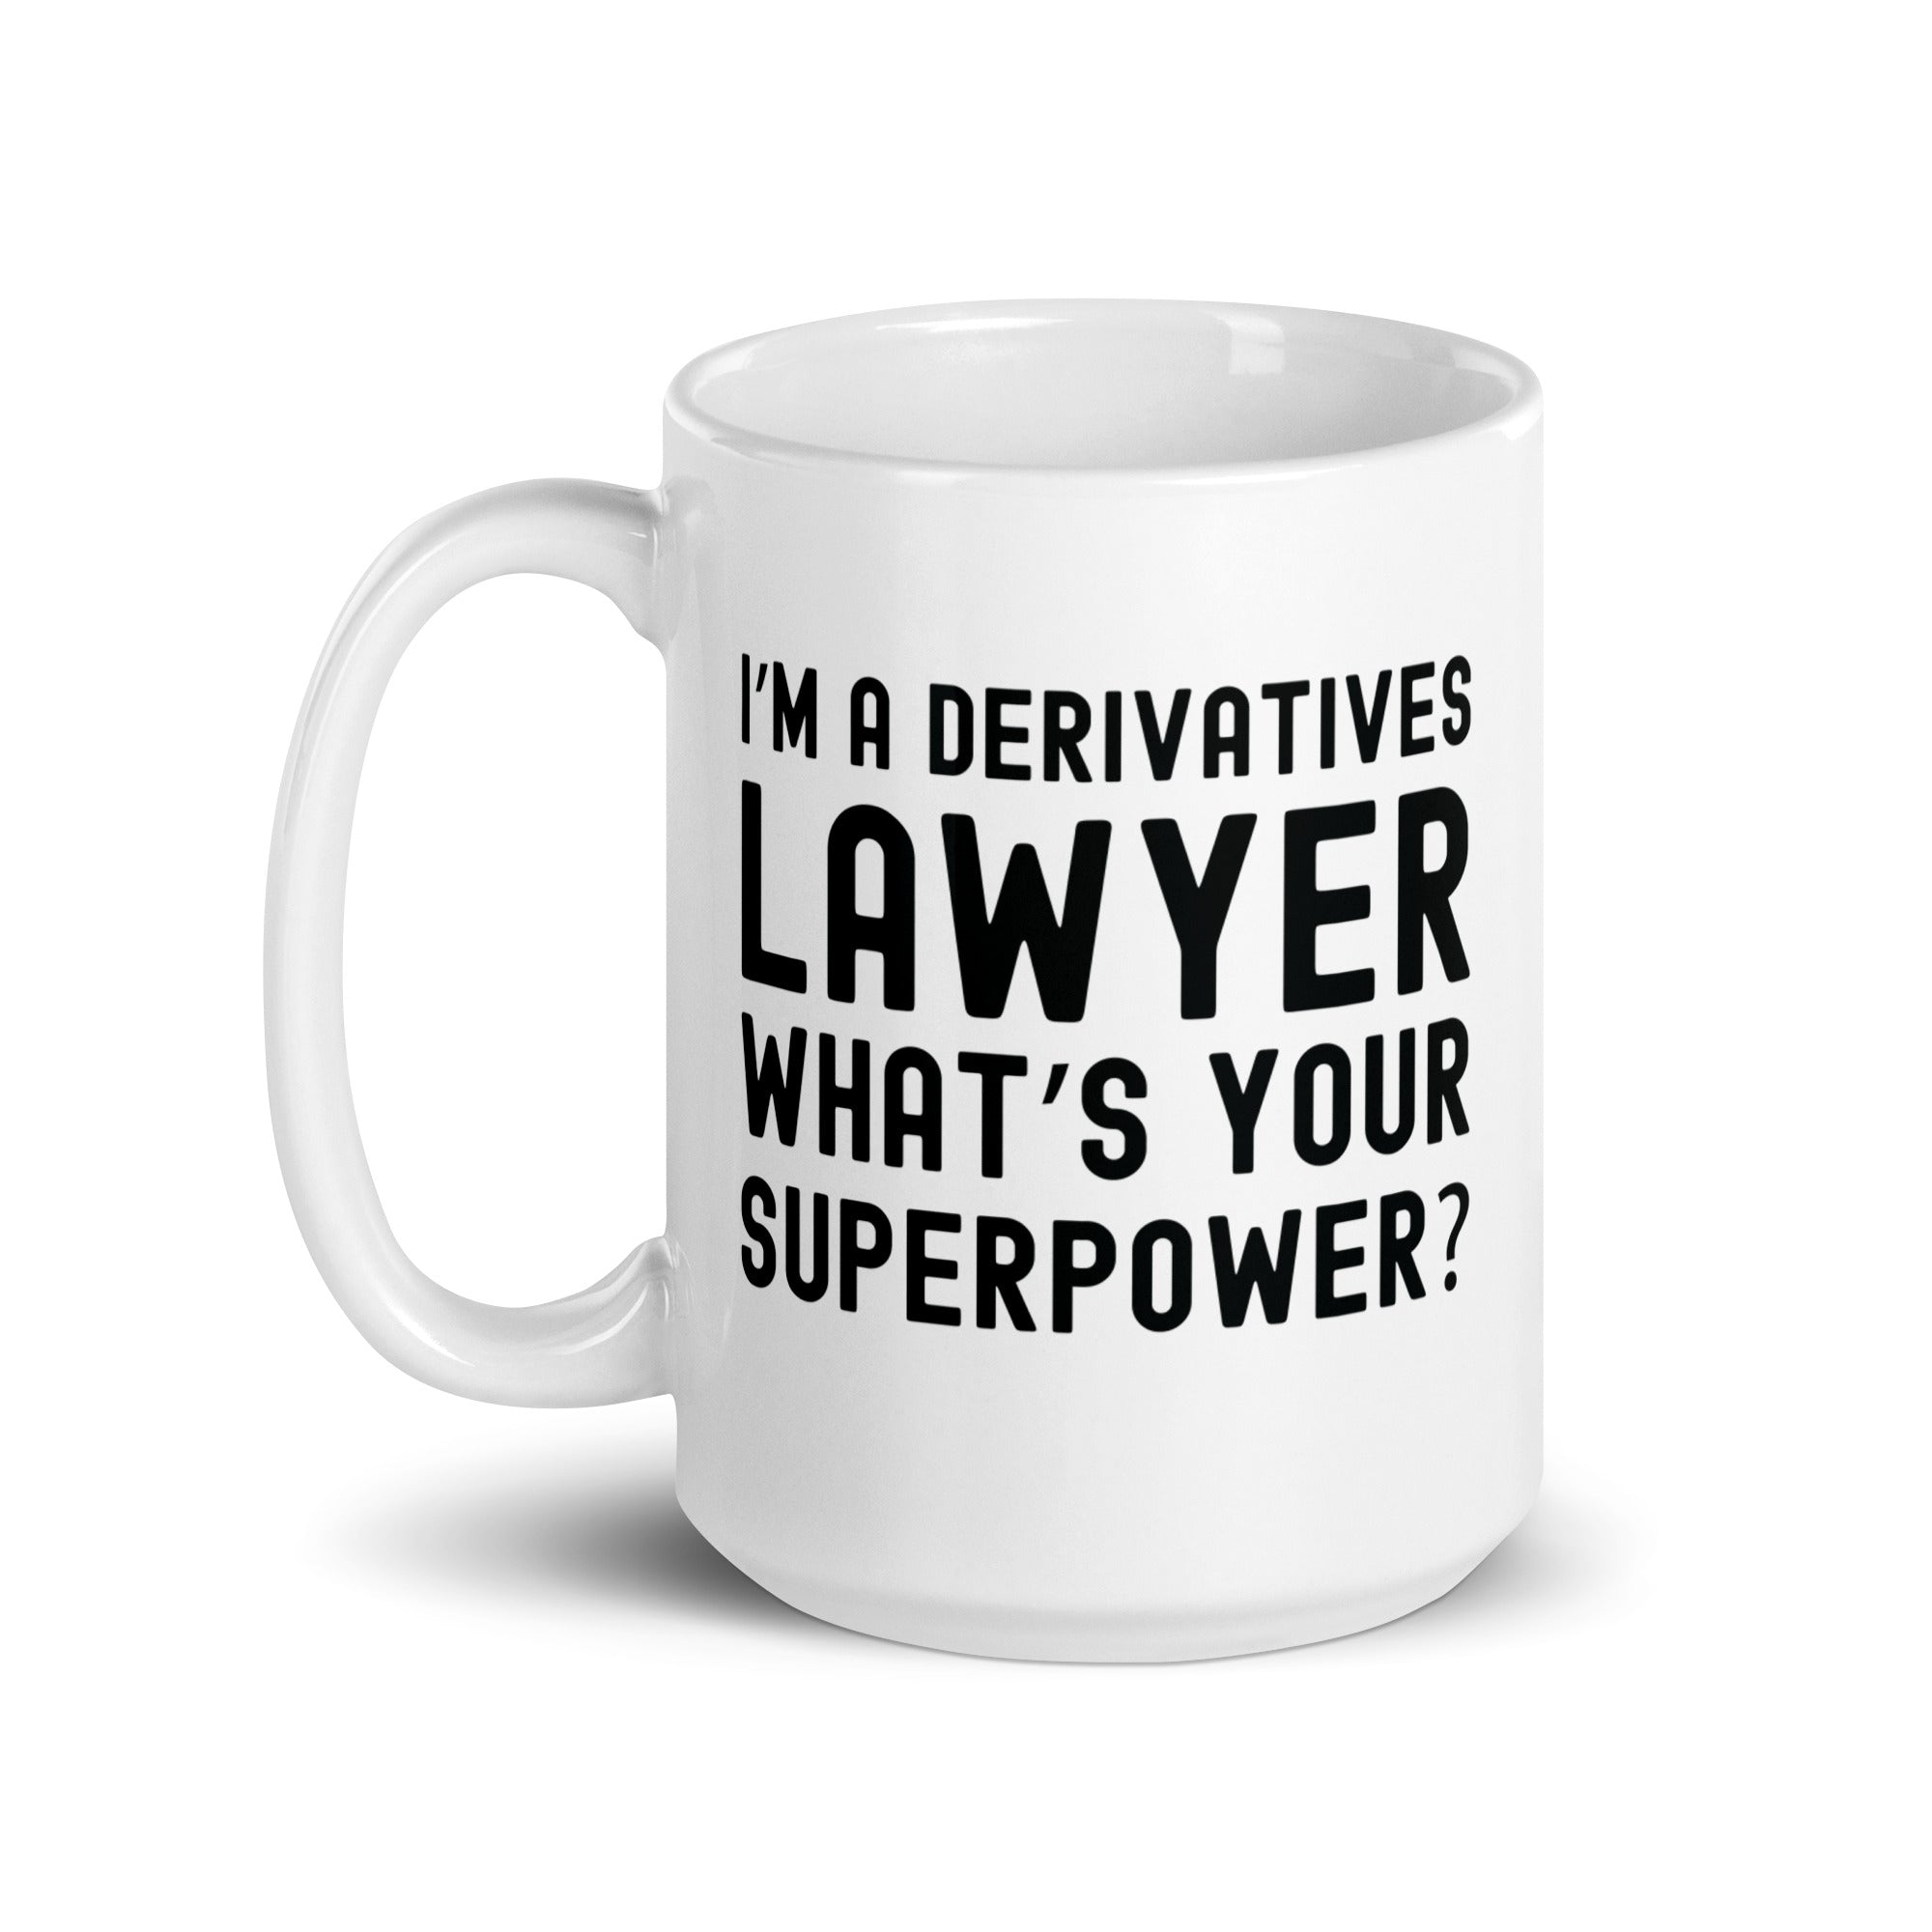 White glossy mug | I’m a derivatives lawyer, what’s your superpower?